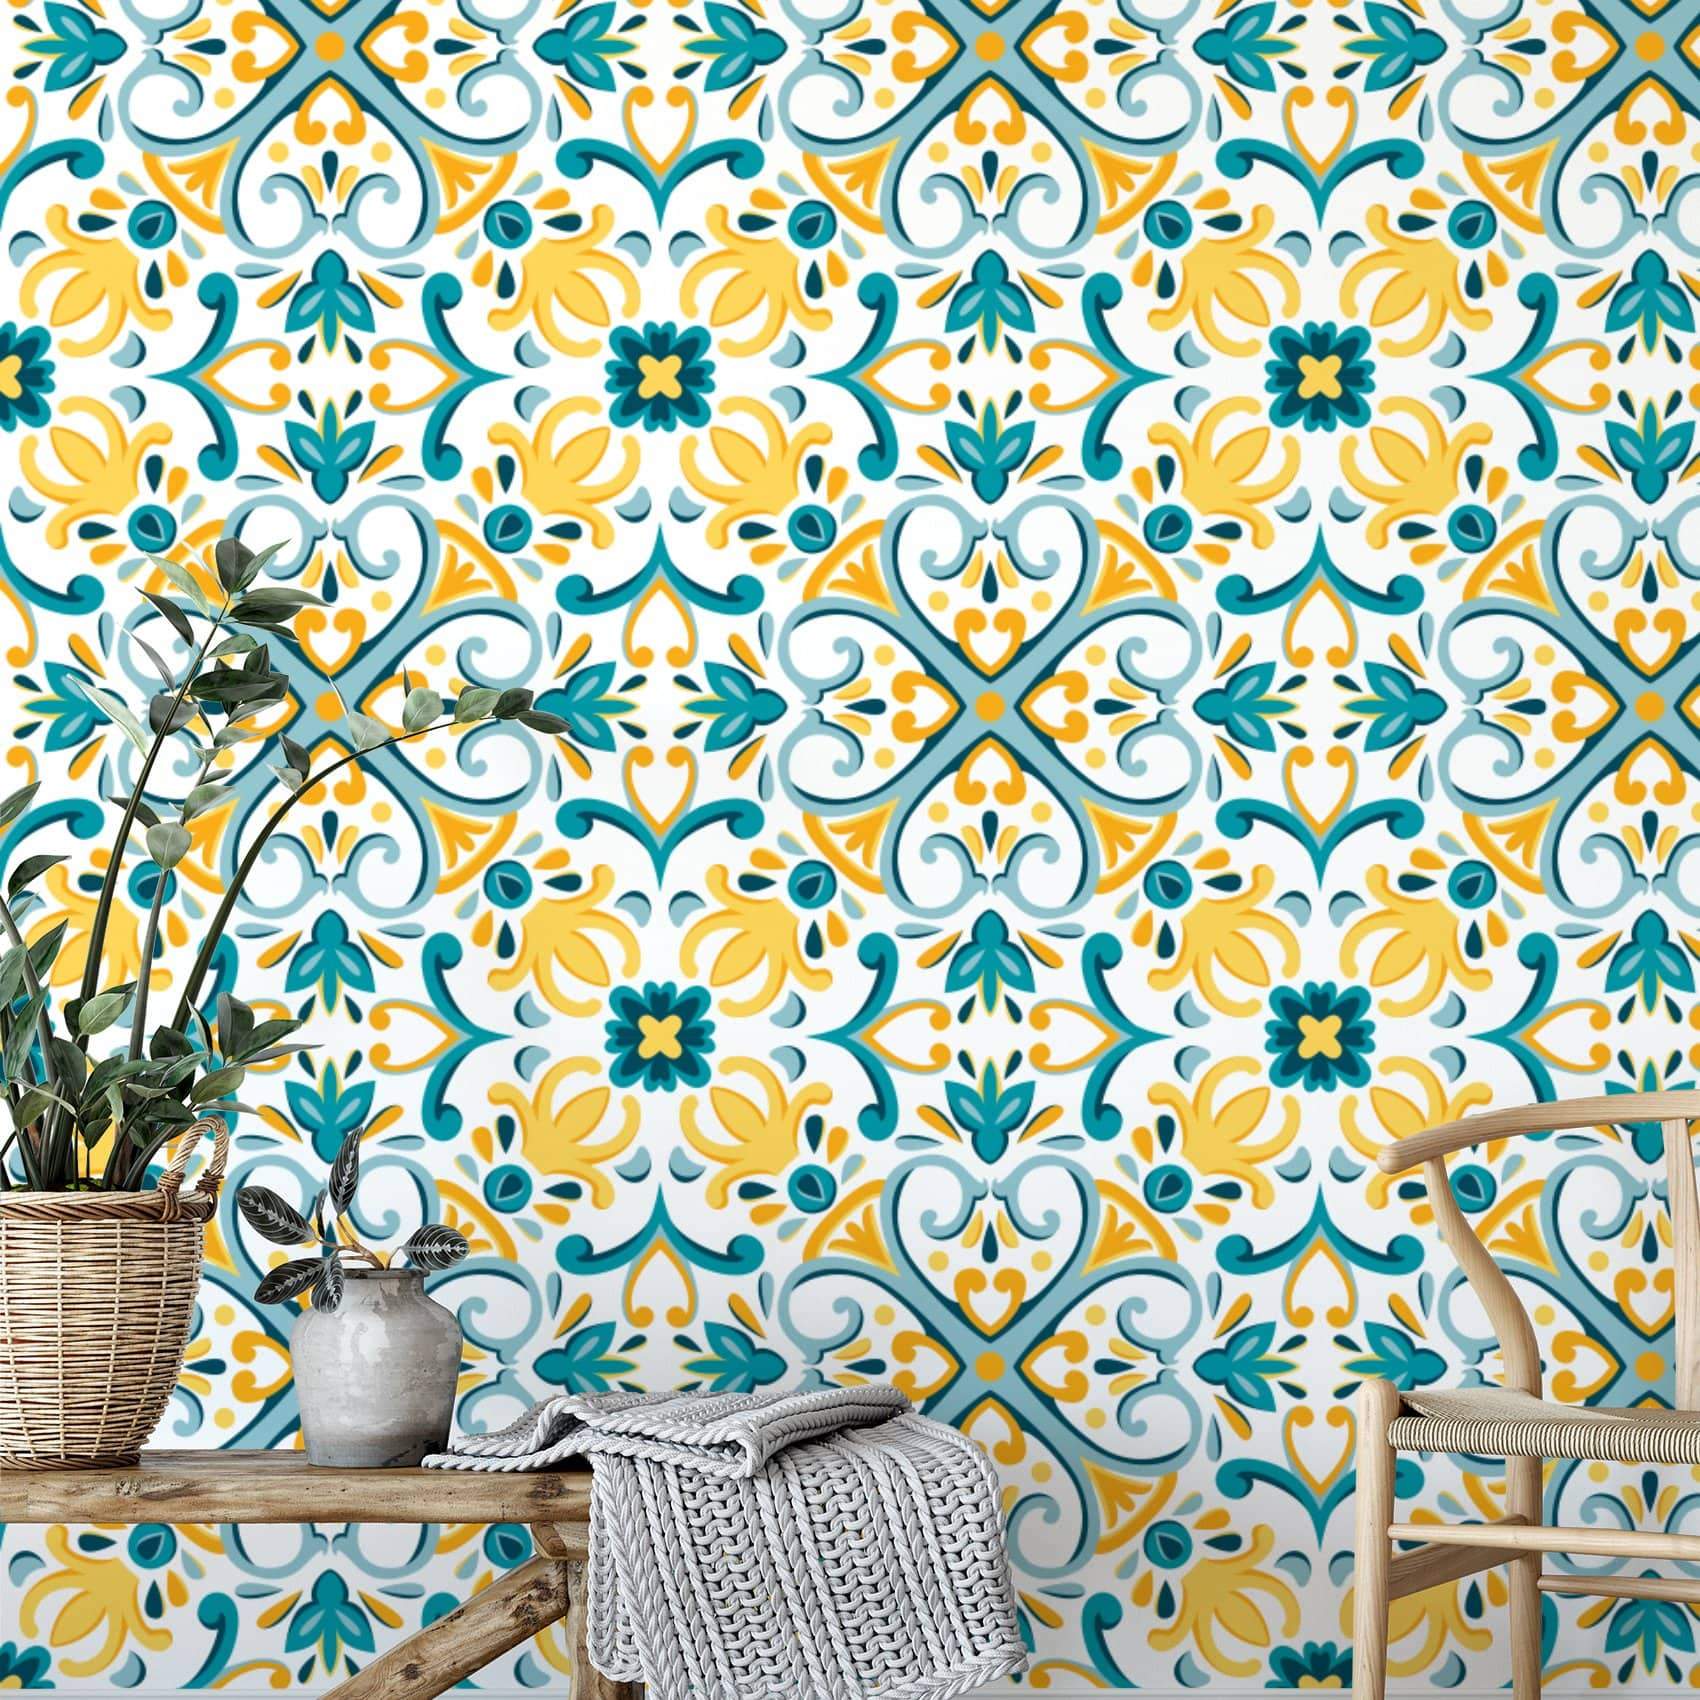 Buy Moroccan Tile Removable Wallpaper for Walls  Tile Peel and Online in  India  Etsy